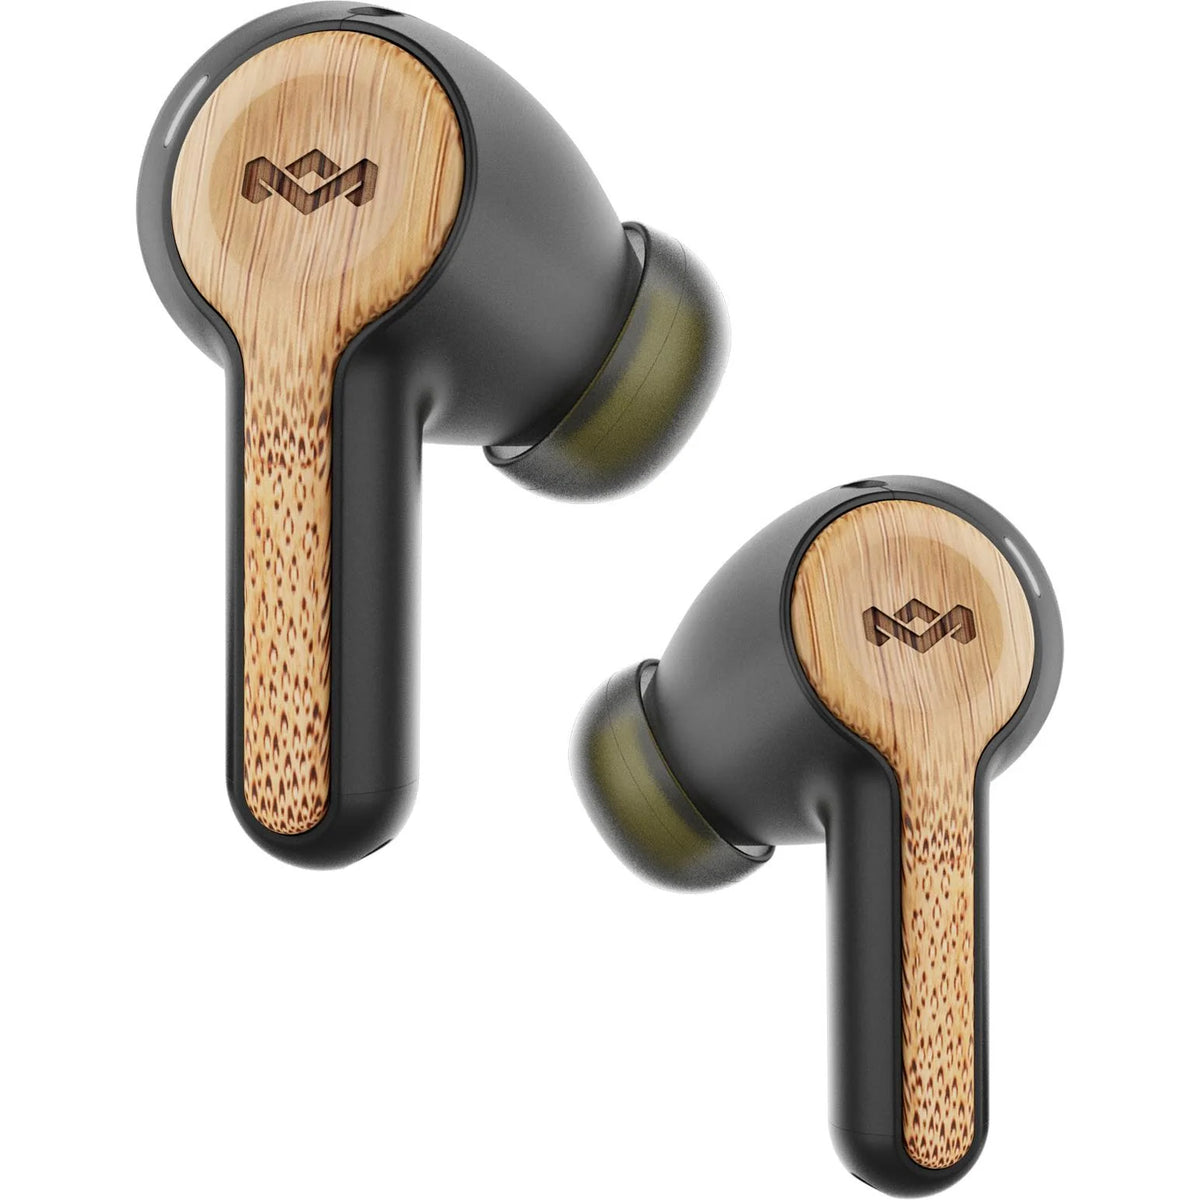 House of Marley Rebel True Wireless Earbuds - Black (Sustainable Materials, 30 Hours Playtime, Dual EQ, IPX5)